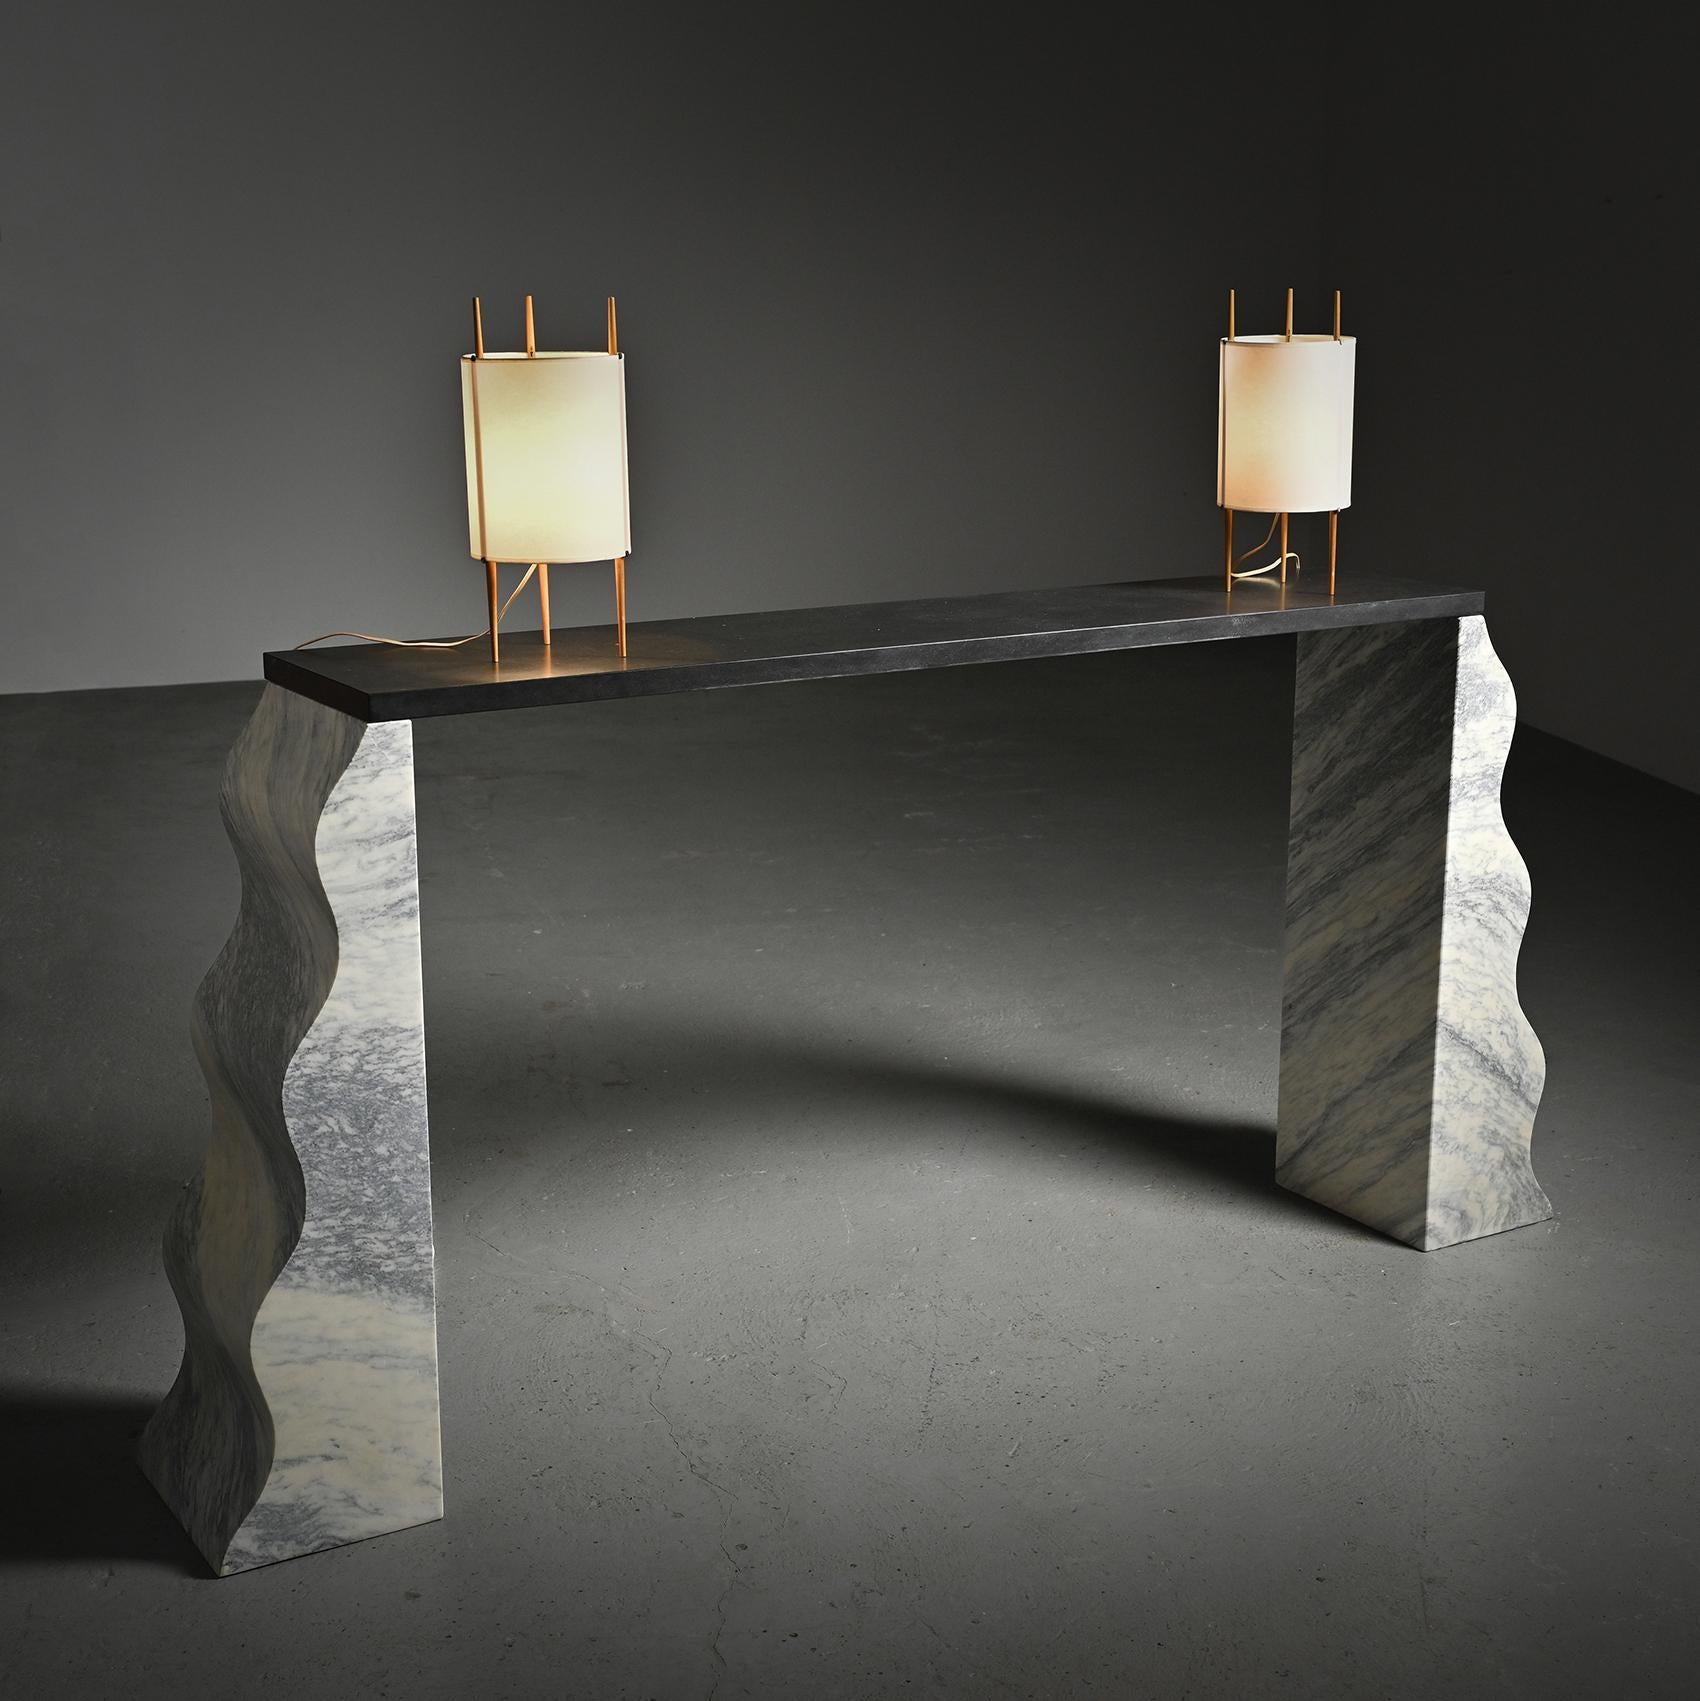 form.

Comprising two white marble pedestals intricately veined in grey, sculpted with a graceful wave-like design, it elegantly upholds a rectangular Zimbabwe's black granit.

Manufacturer : Ultima Edizione, 1987.